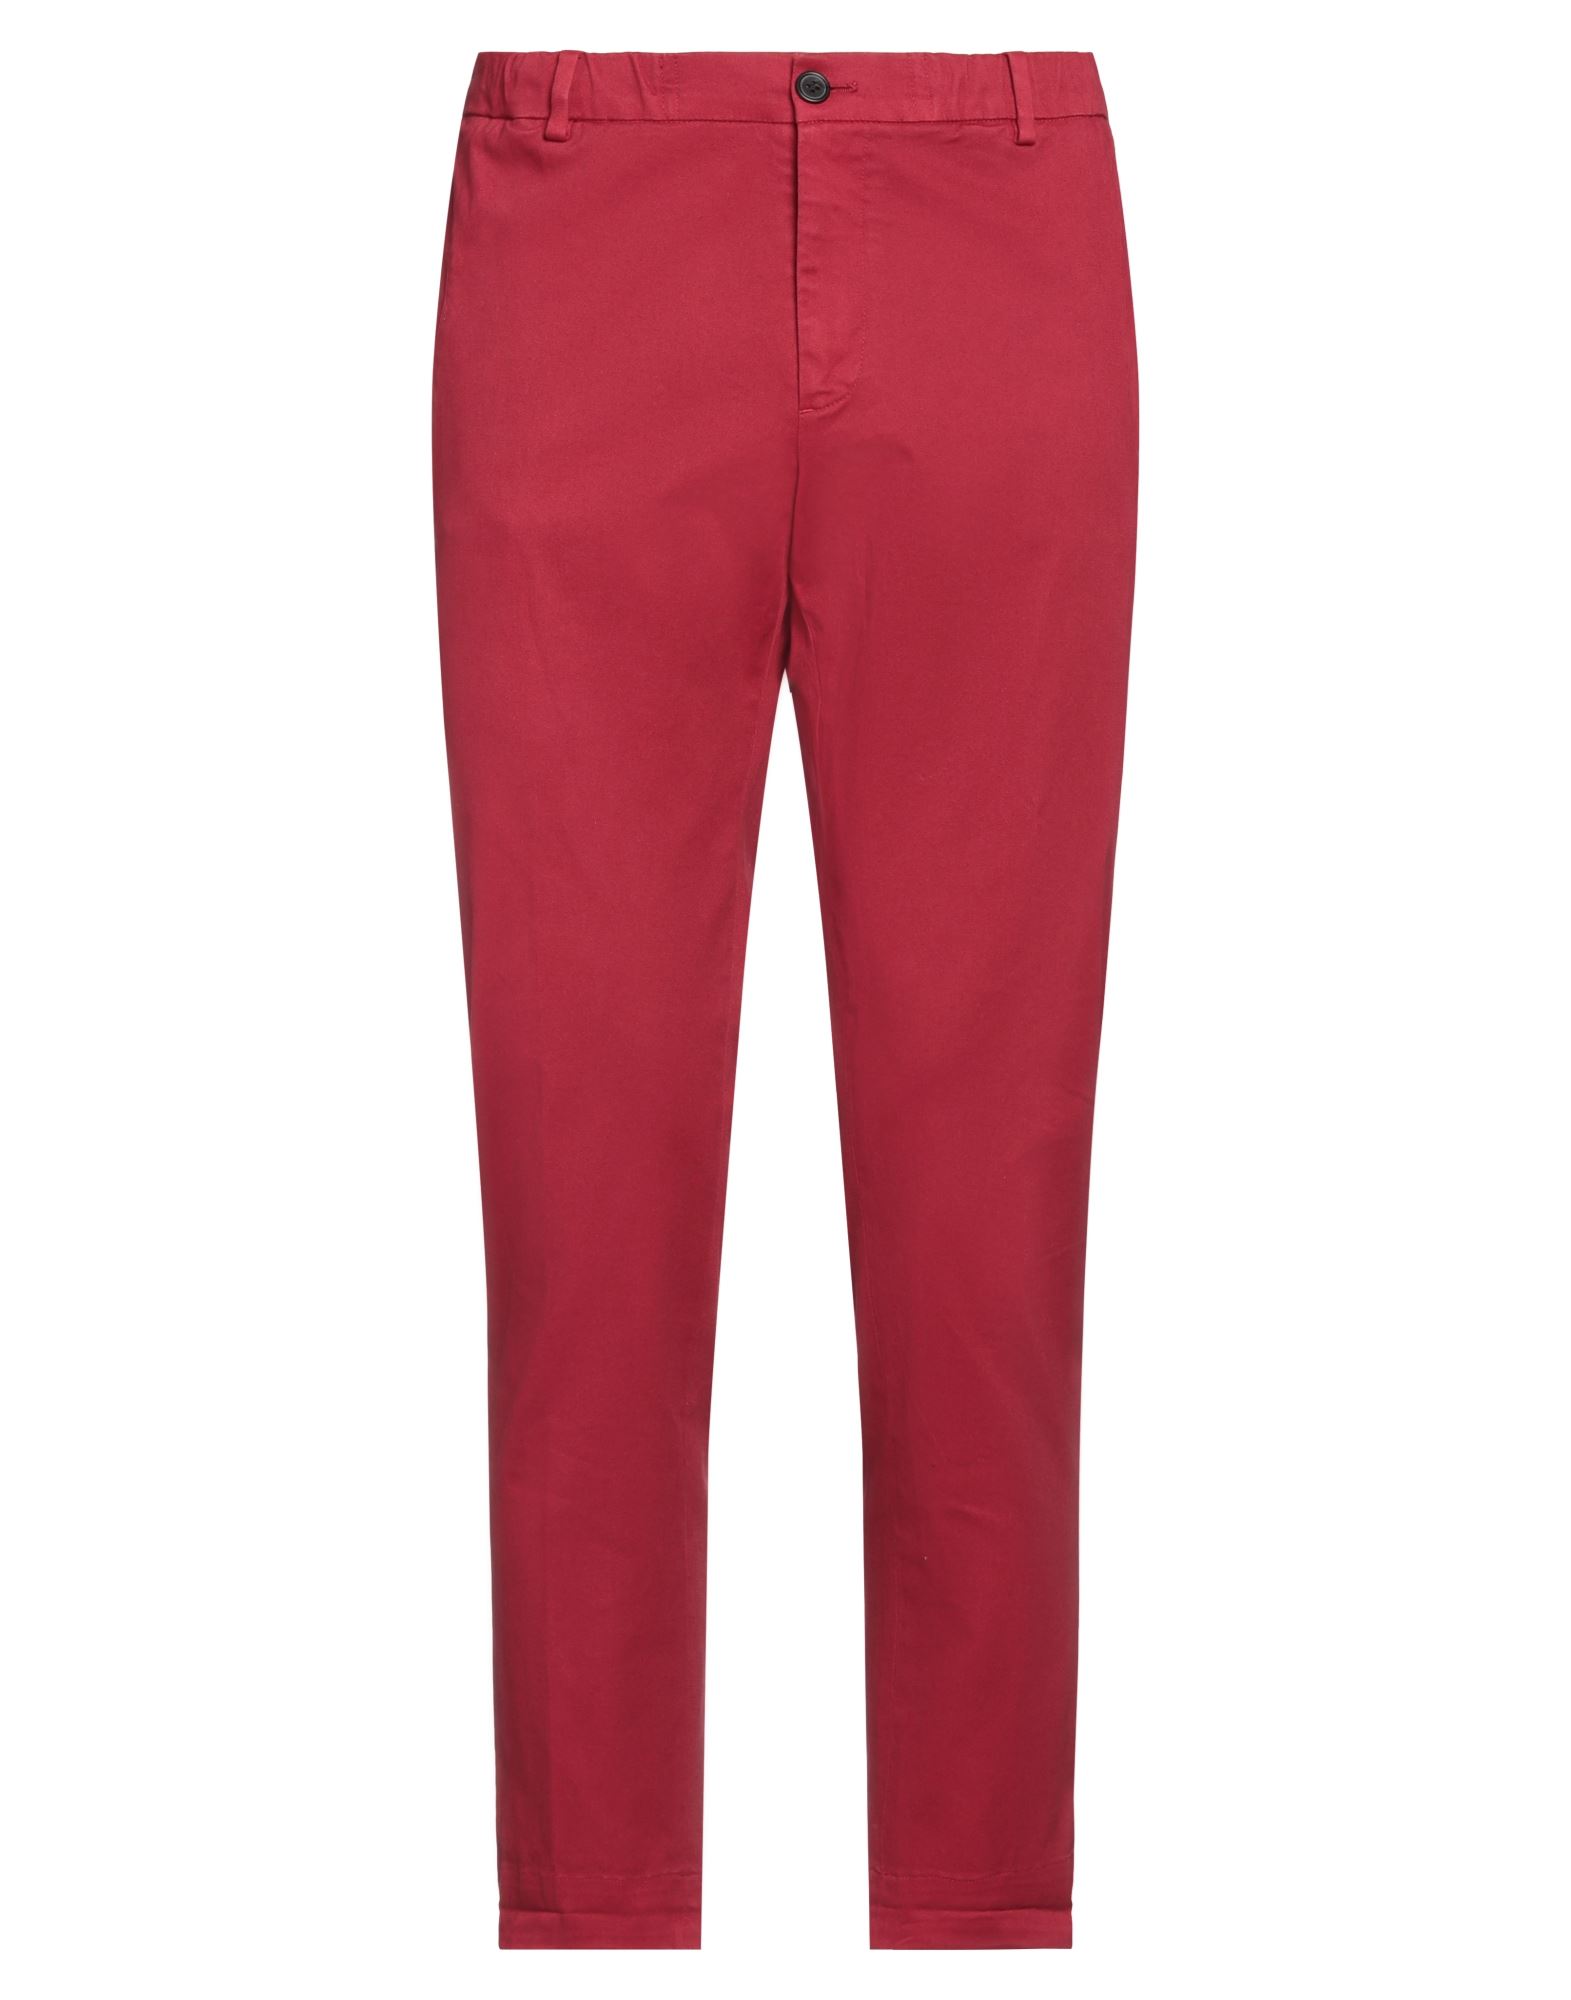 Obvious Basic Pants In Brick Red